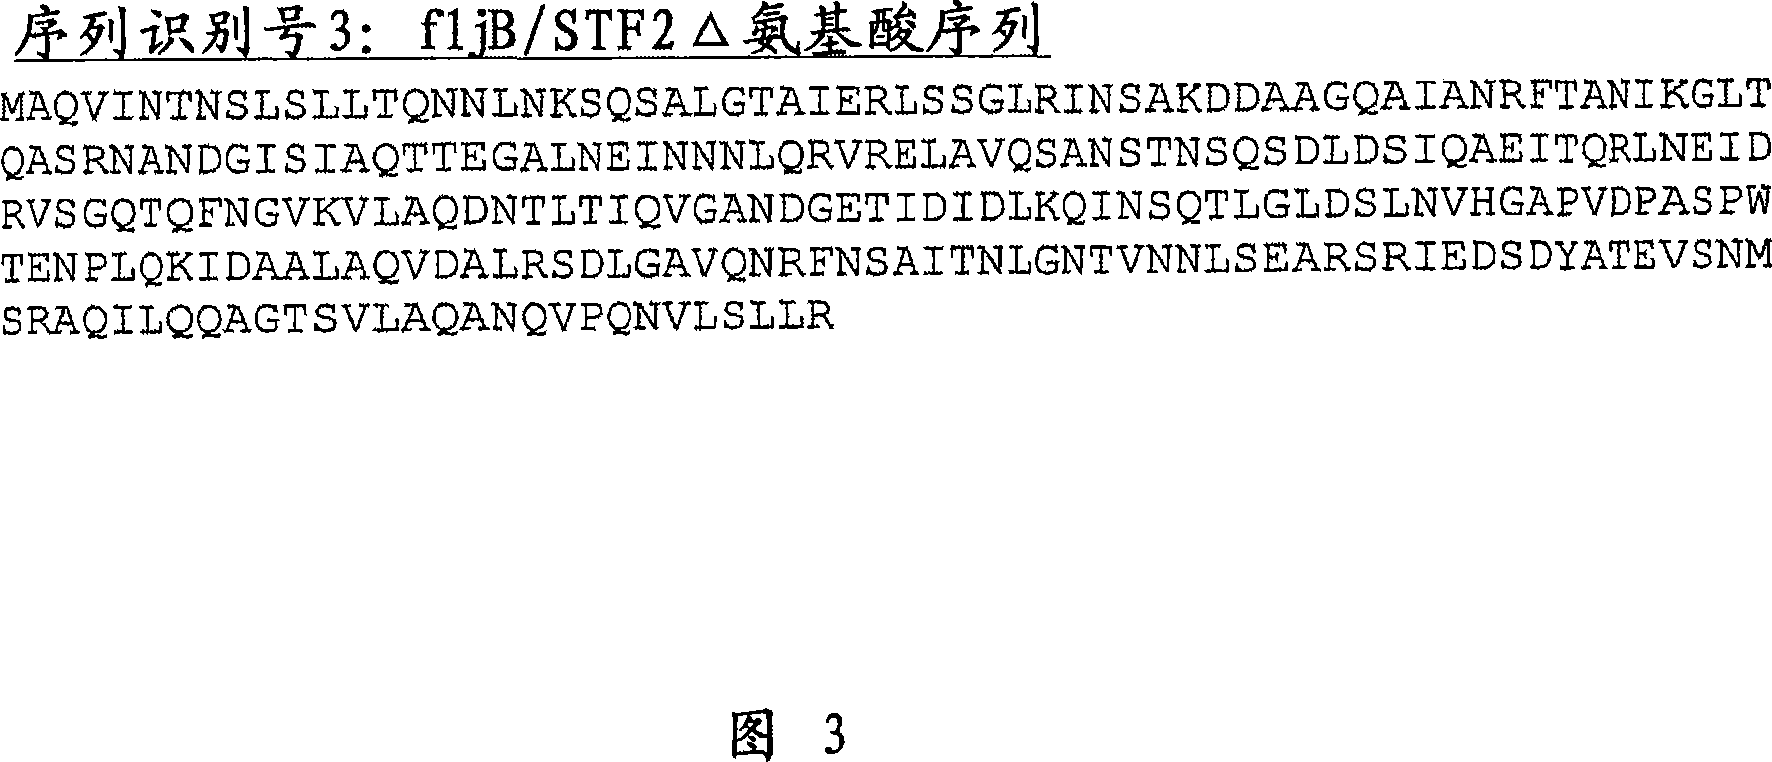 Compositions of influenza viral proteins and methods of use thereof